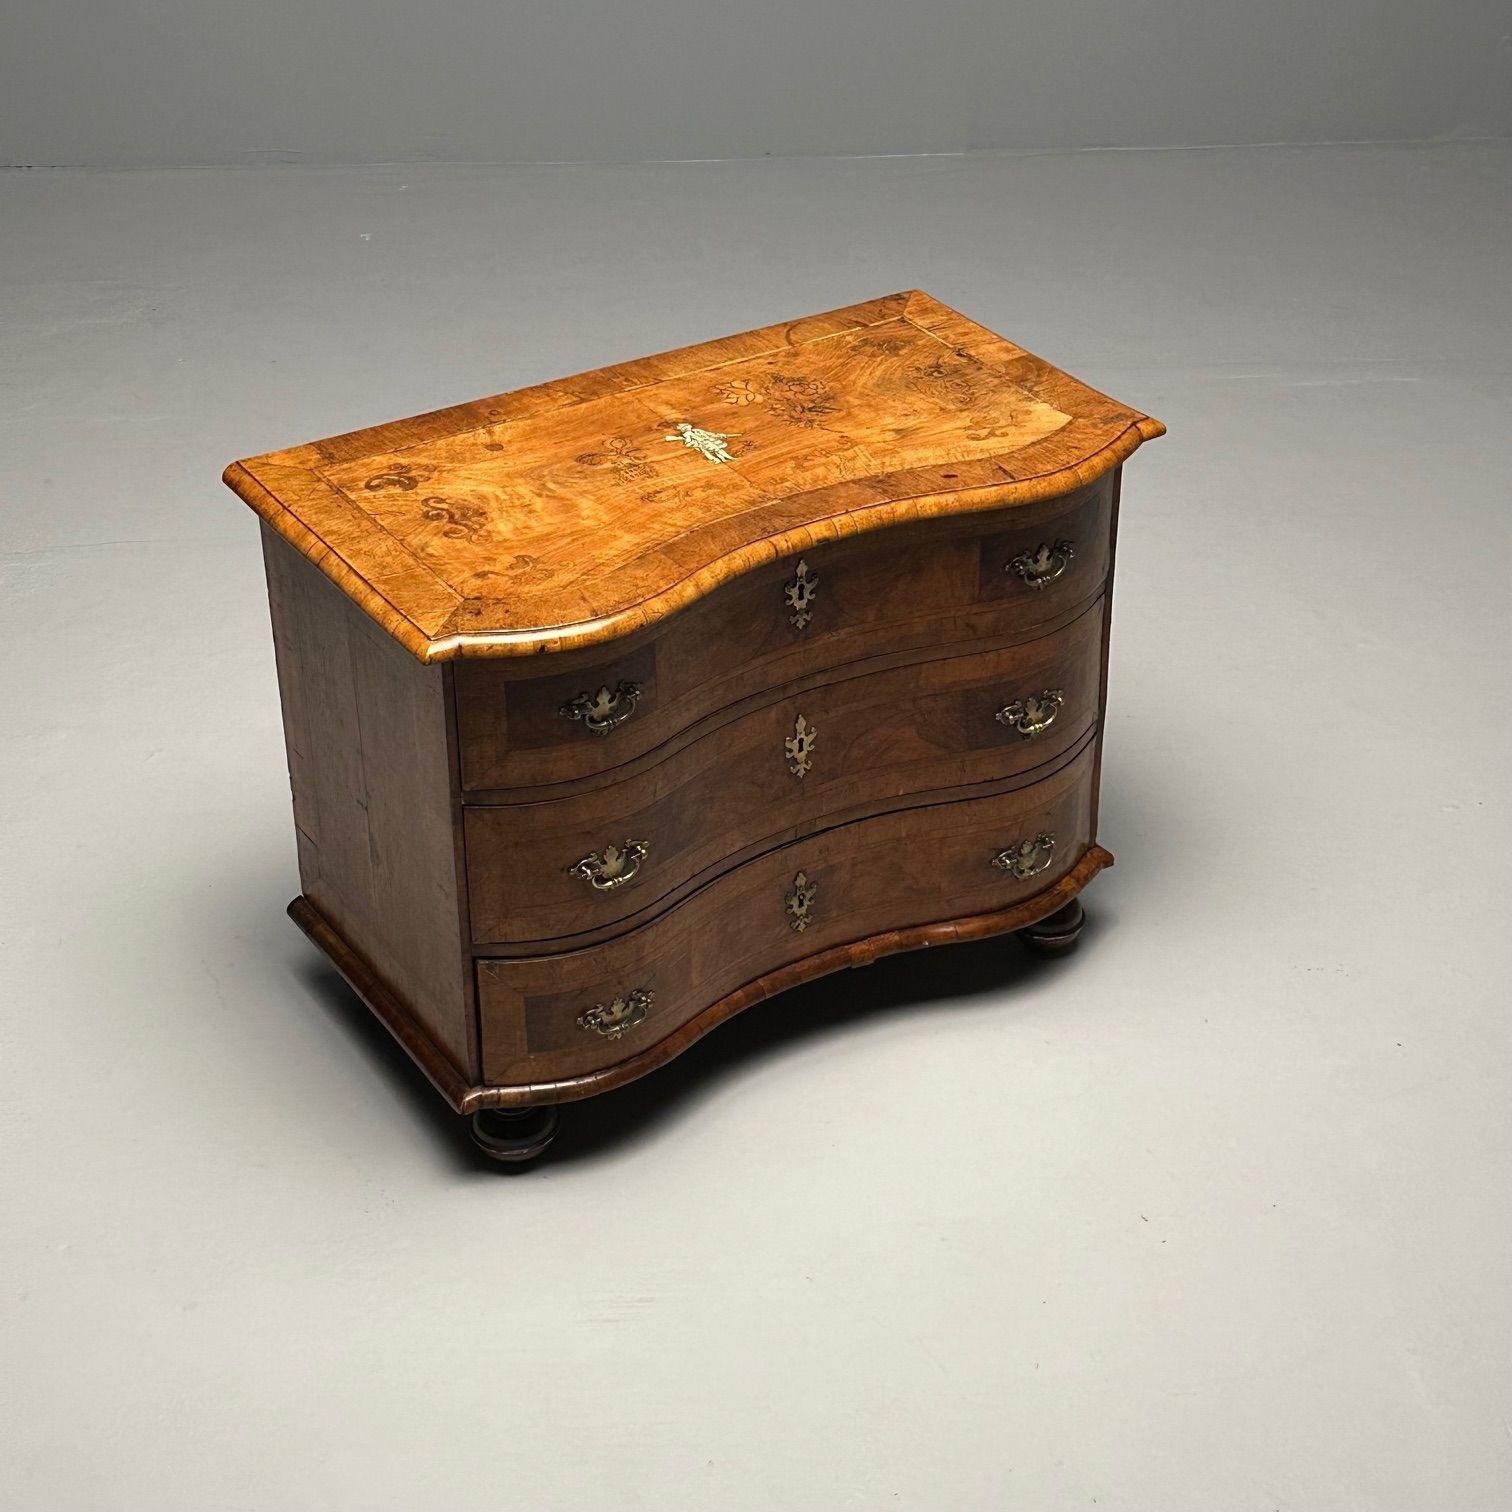 Late 18th Century German Baroque Fruit Wood Marquetry Inlaid Cabinet / Commode, Gulc Nachi For Sale